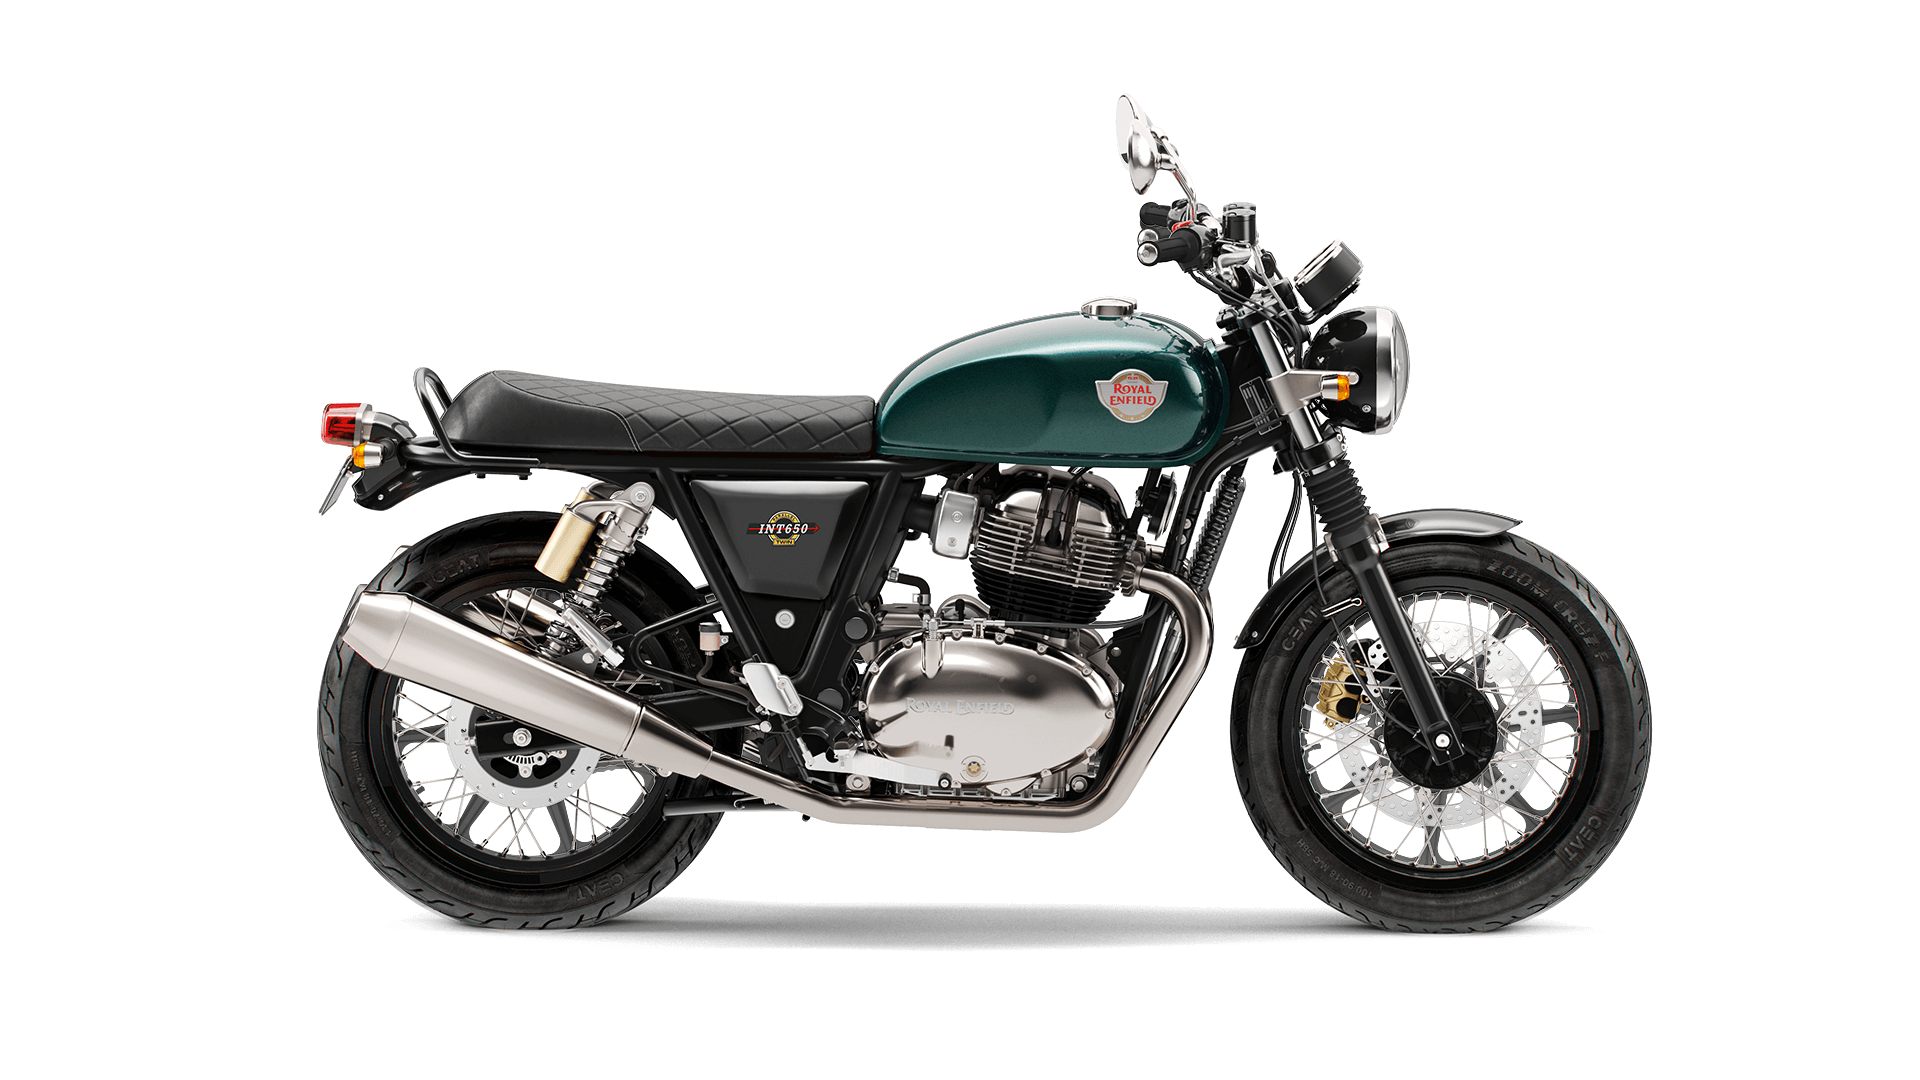 Royal Enfield INT 650 Price, Colors, Images & Mileage | Royal Enfield